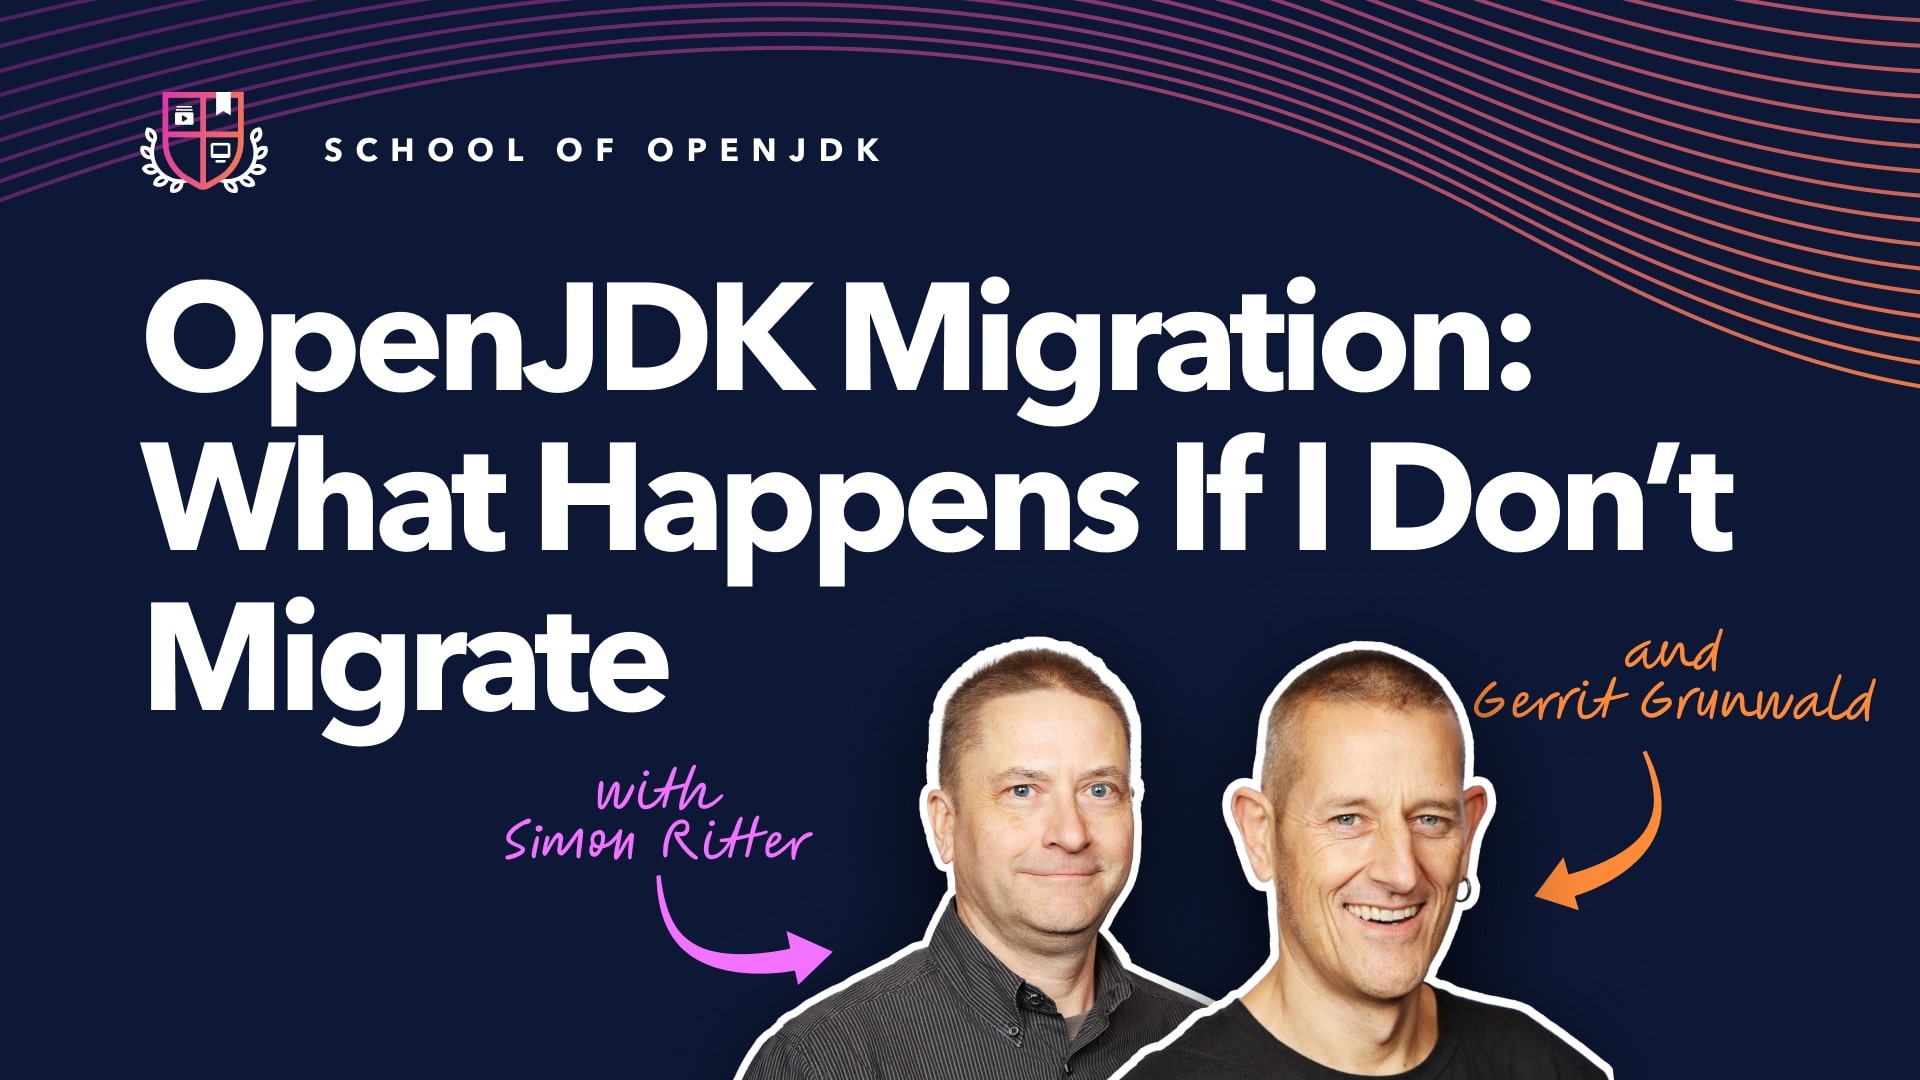 OpenJDK Migration - What Happens If I Don’t Migrate